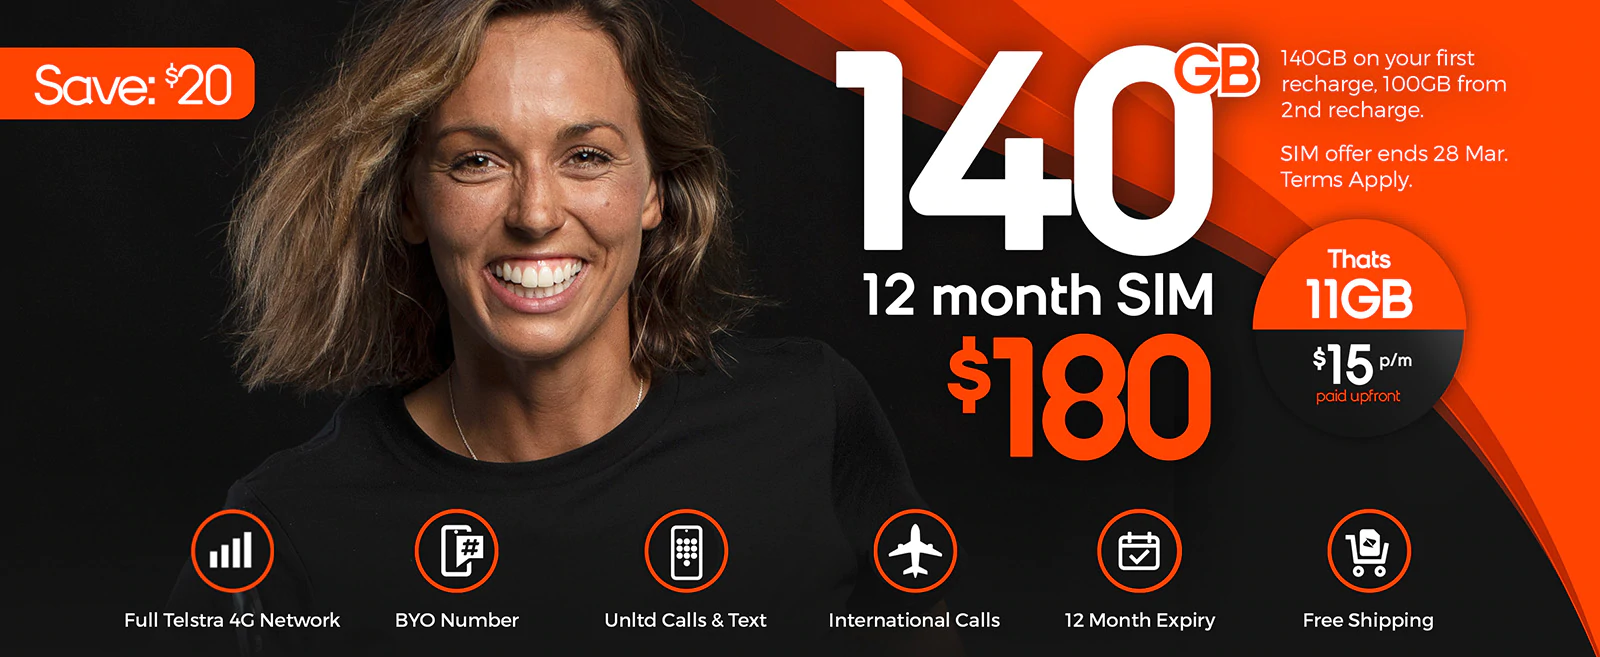 Boost Save $20 OFF on $200 Prepaid SIM - Now $180